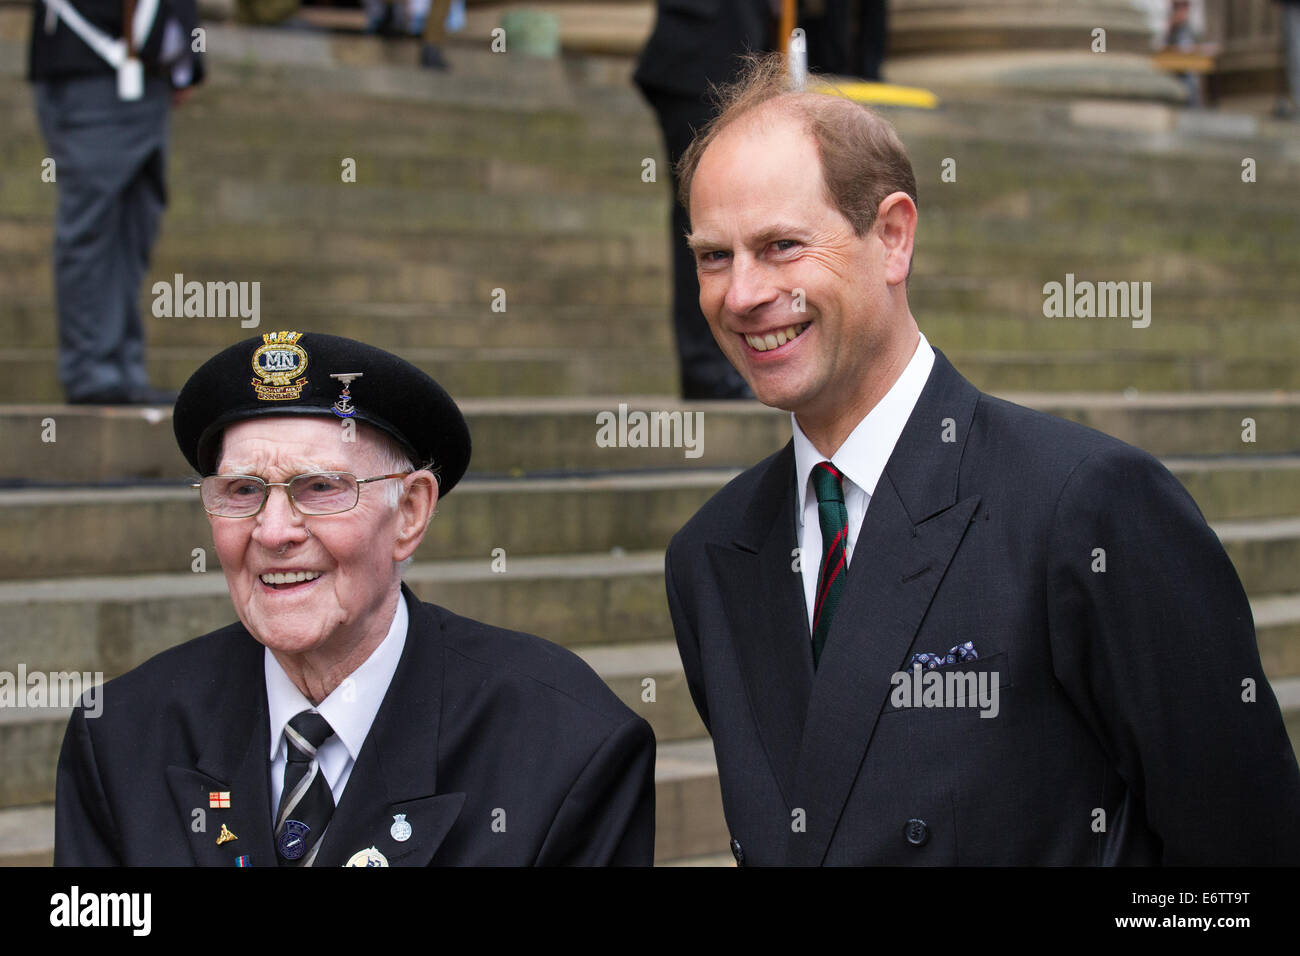 Liverpool, Merseyside, UK 31st August, 2014. H.R.H.  Prince Edward with Mr Albert Leek, 89  at Liverpool Pals commemoration and the re-enactment of the Liverpool Pals signing up to answer Lord Derby's call for recruits 100 years to the day it happened. Liverpool's success prompted other towns to form units, with civic pride and community spirit driving competition to raise the highest numbers. Stock Photo